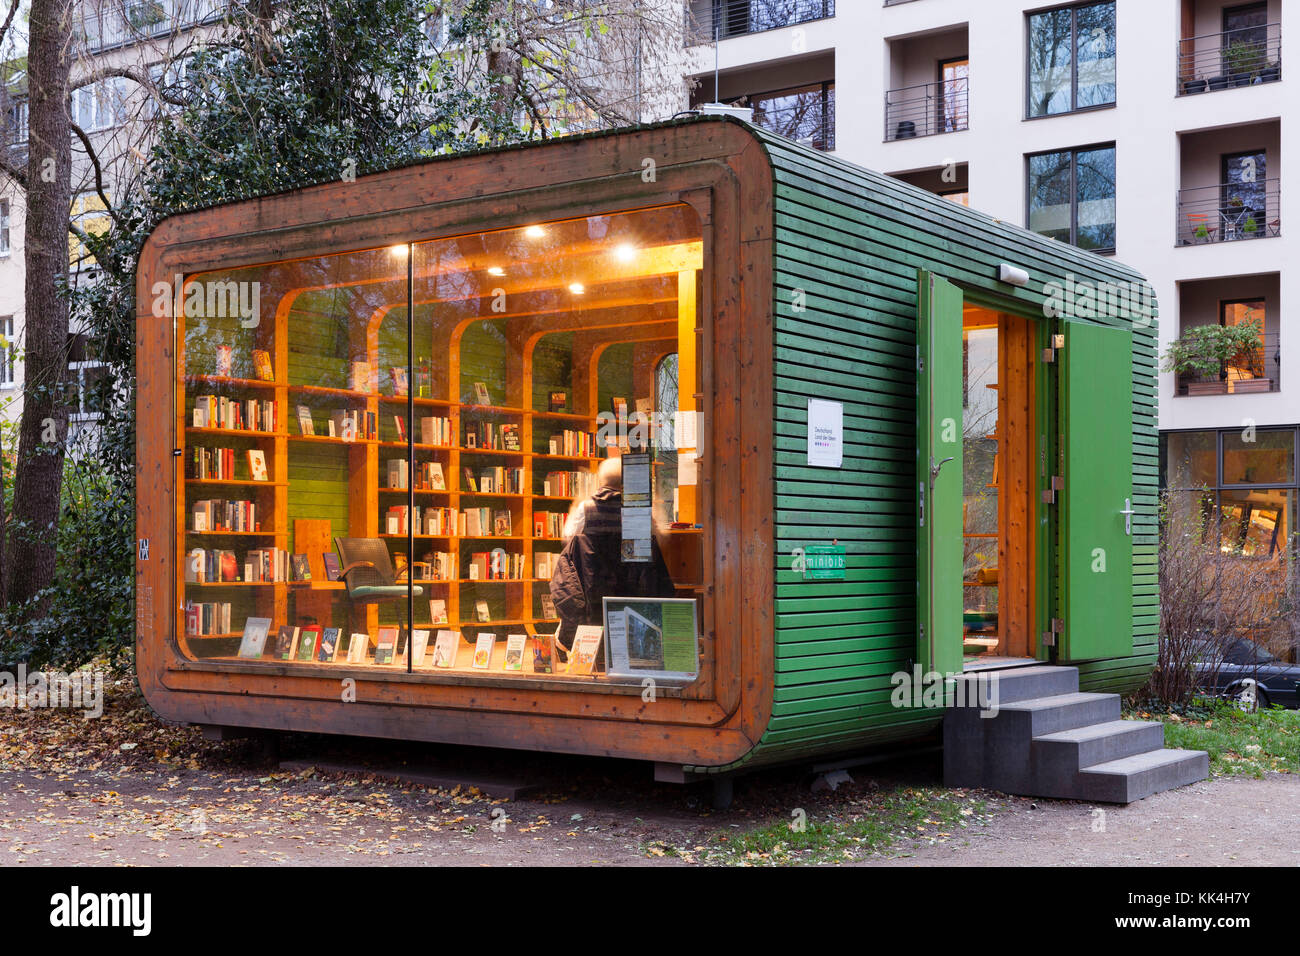 Germany, Cologne, Germany's first kiosk for books called minibib at the Stadtgarten, at the 'minibib' people can  lend books for free. No personal dat Stock Photo